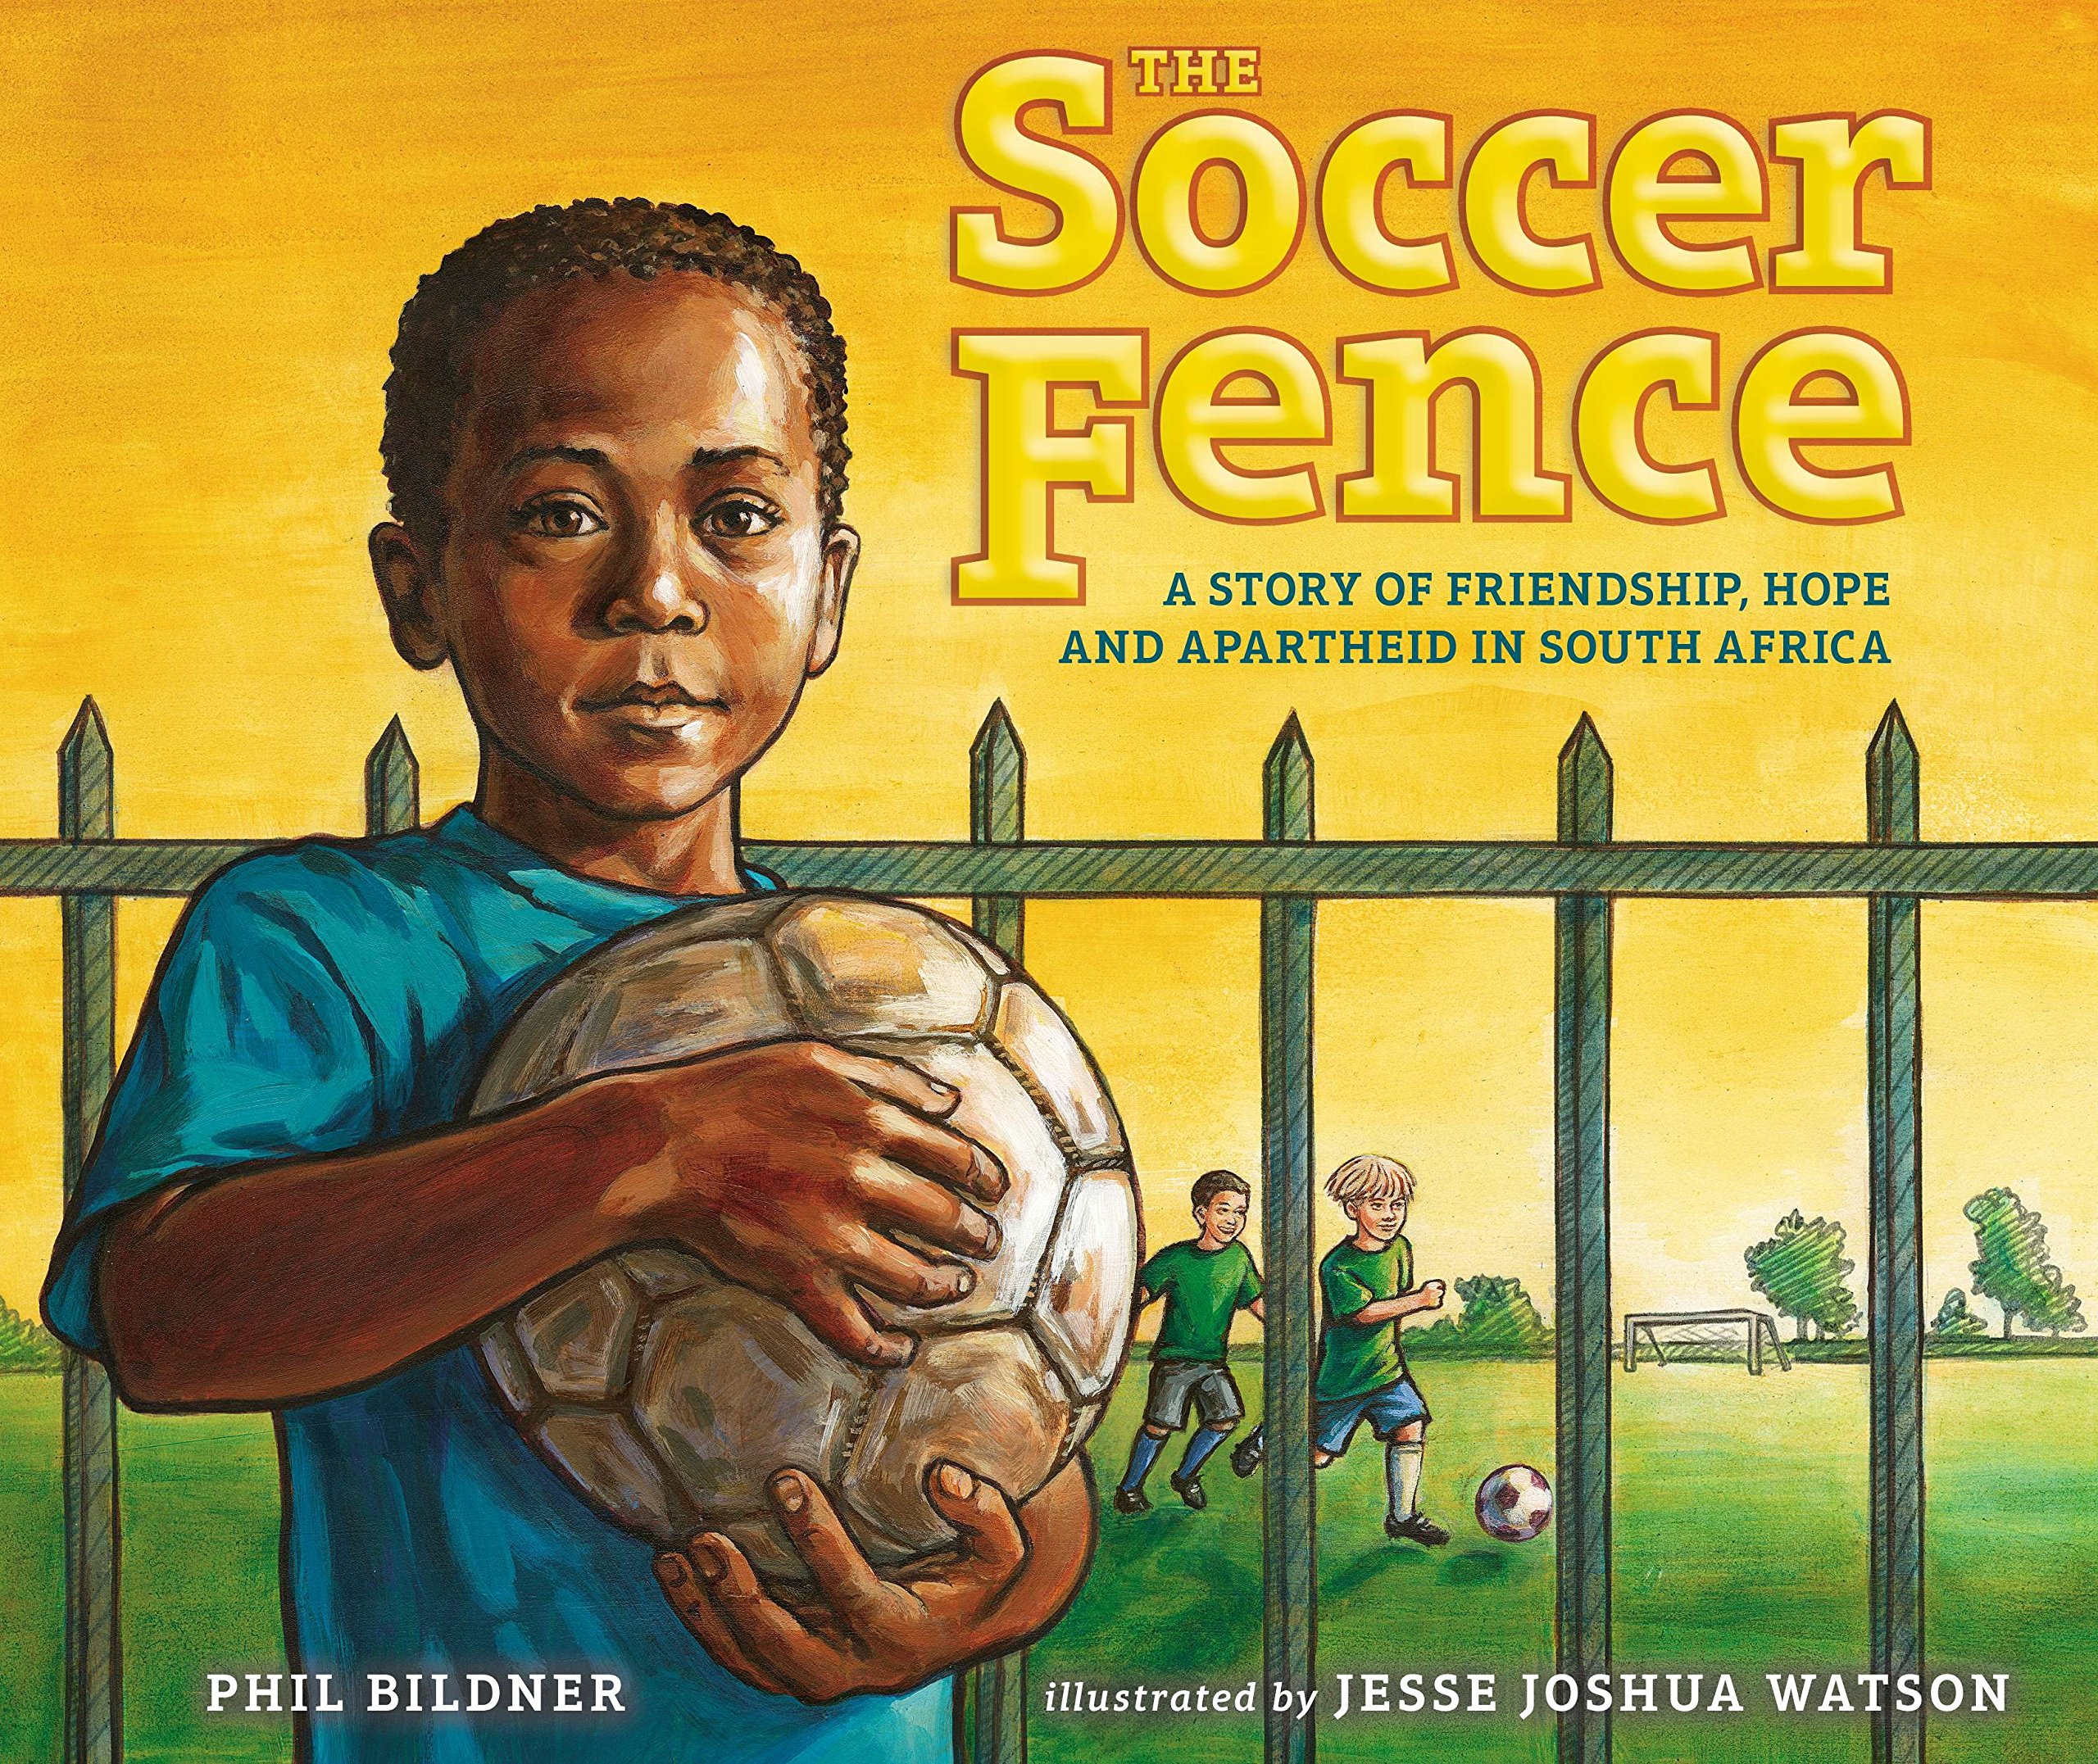 The Soccer Fence: A Story of Friendship Hope and Apartheid in South Africa by Phil Bildner book cover